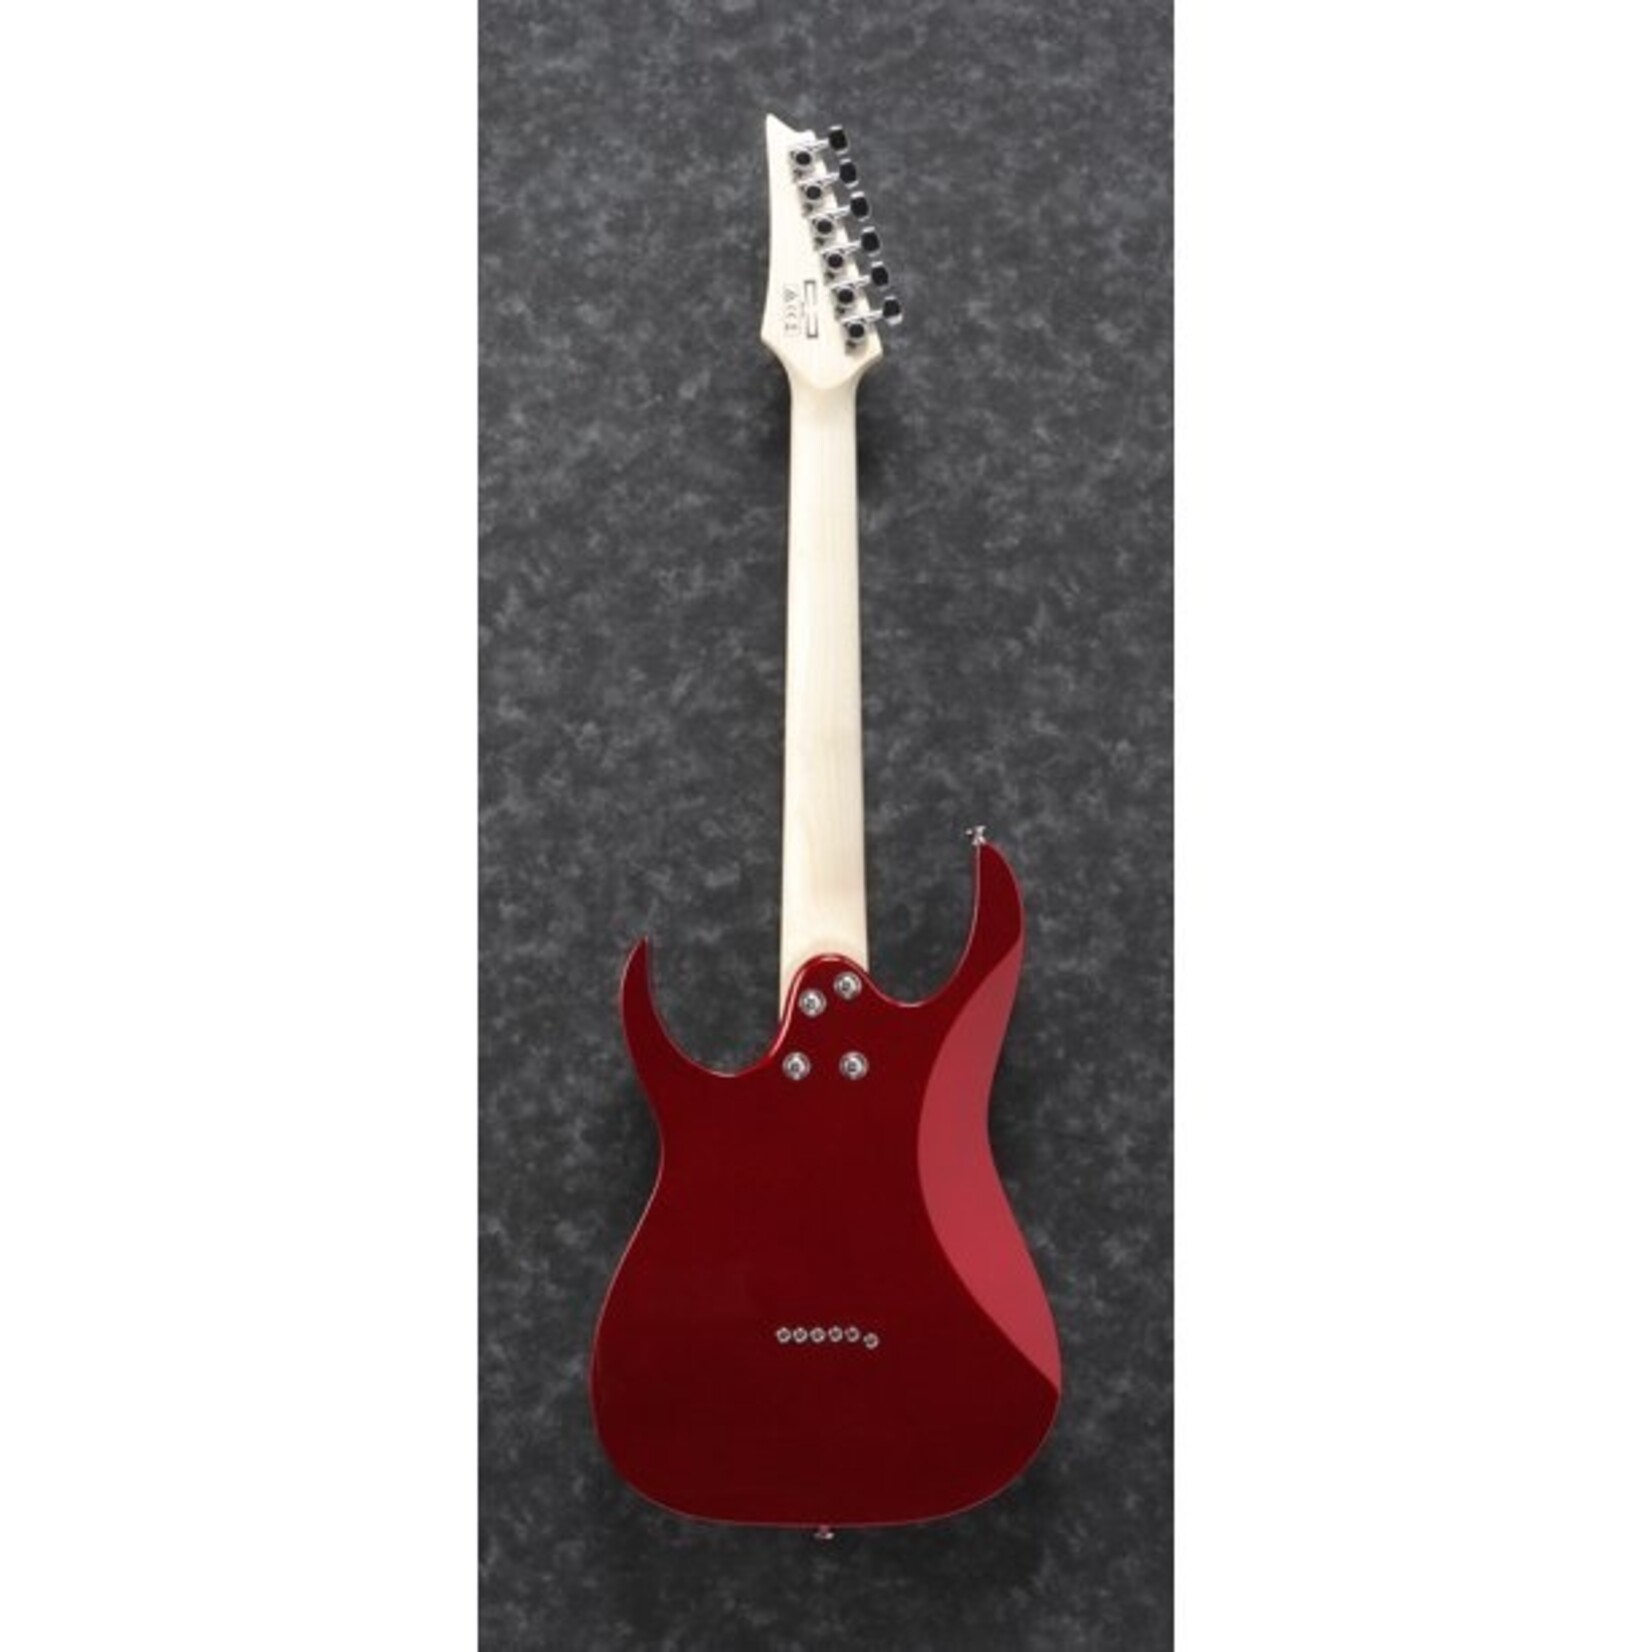 Ibanez miKro GRGM21M Electric Guitar - Candy Apple Red